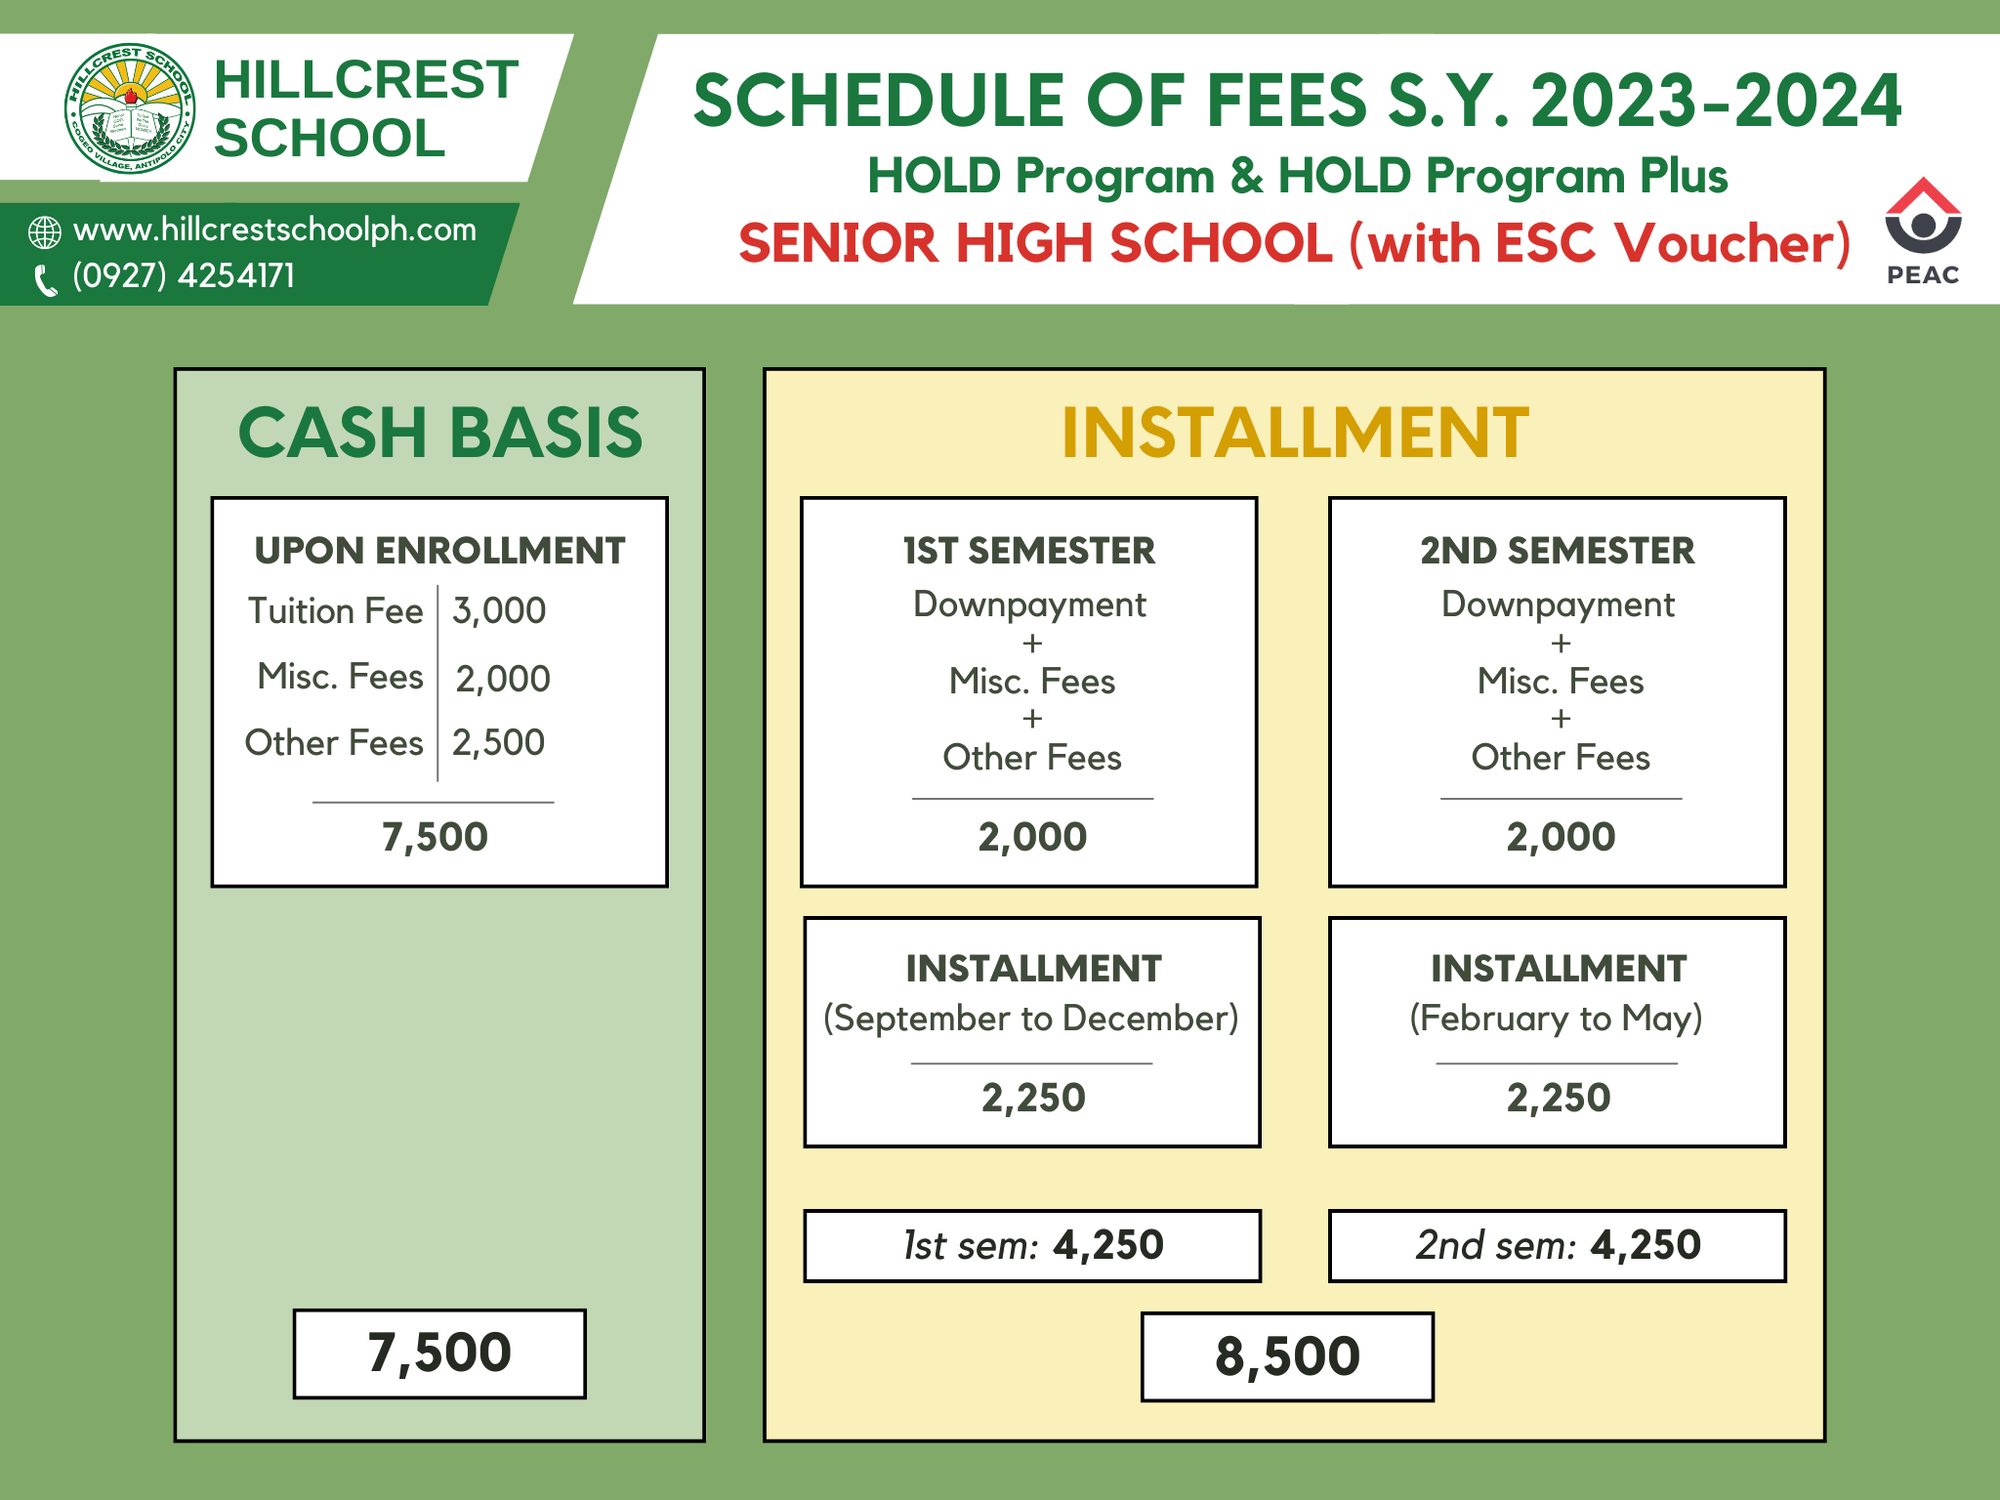 Tuition Fee Rates